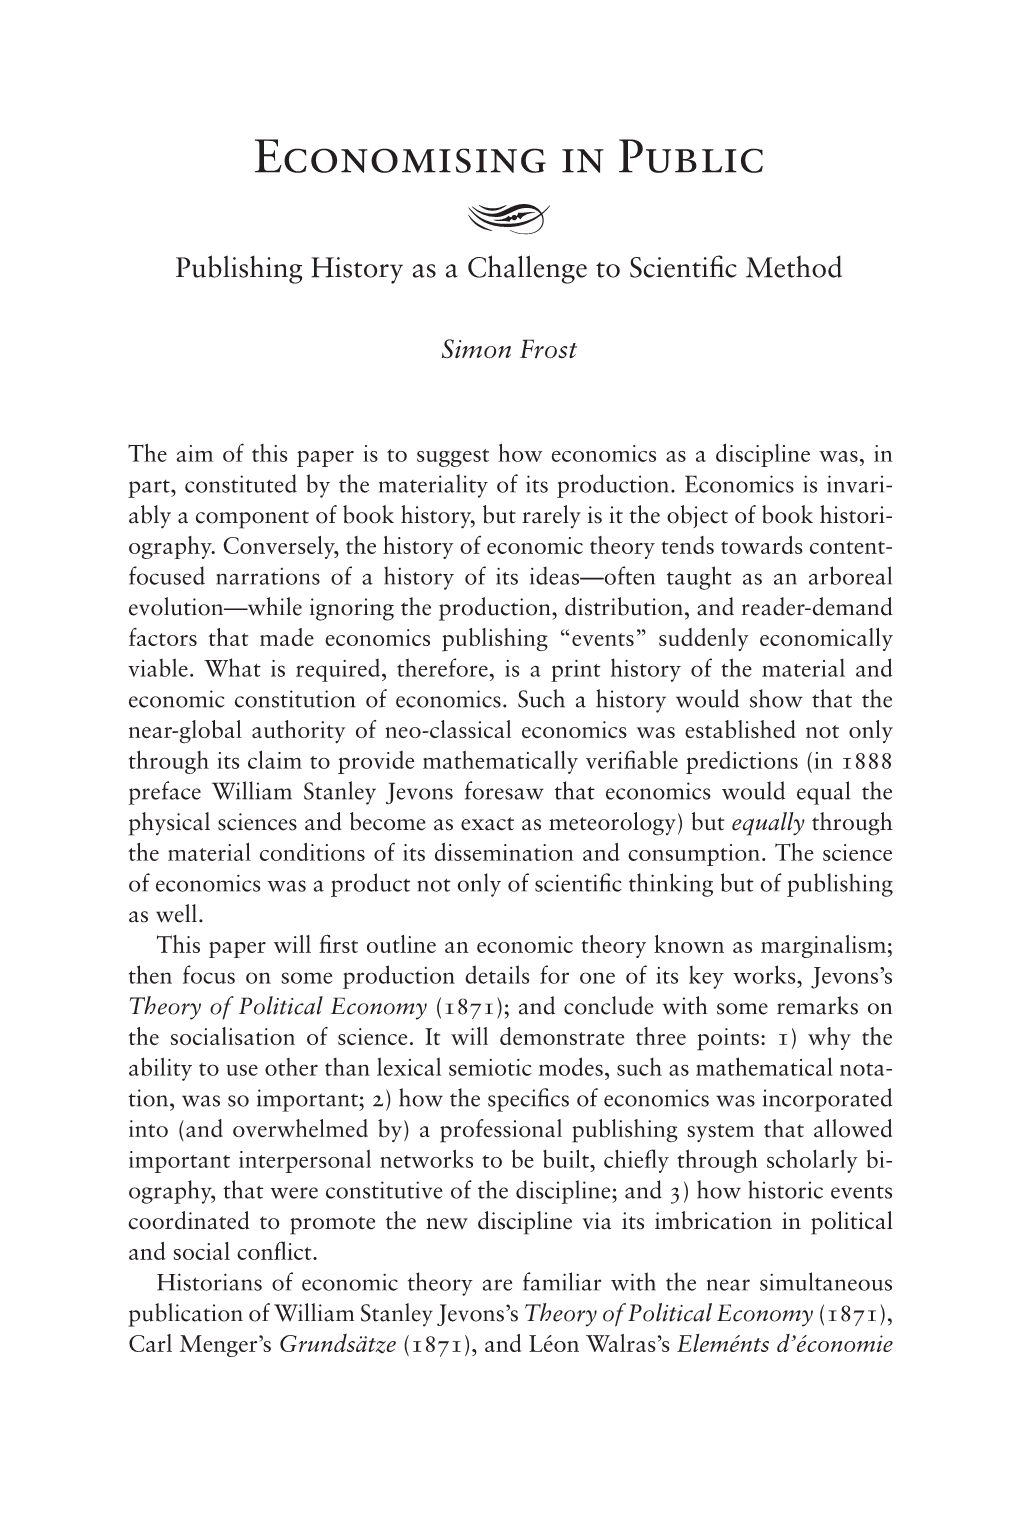 Economising in Public: Publishing History As a Challenge to Scientific Method